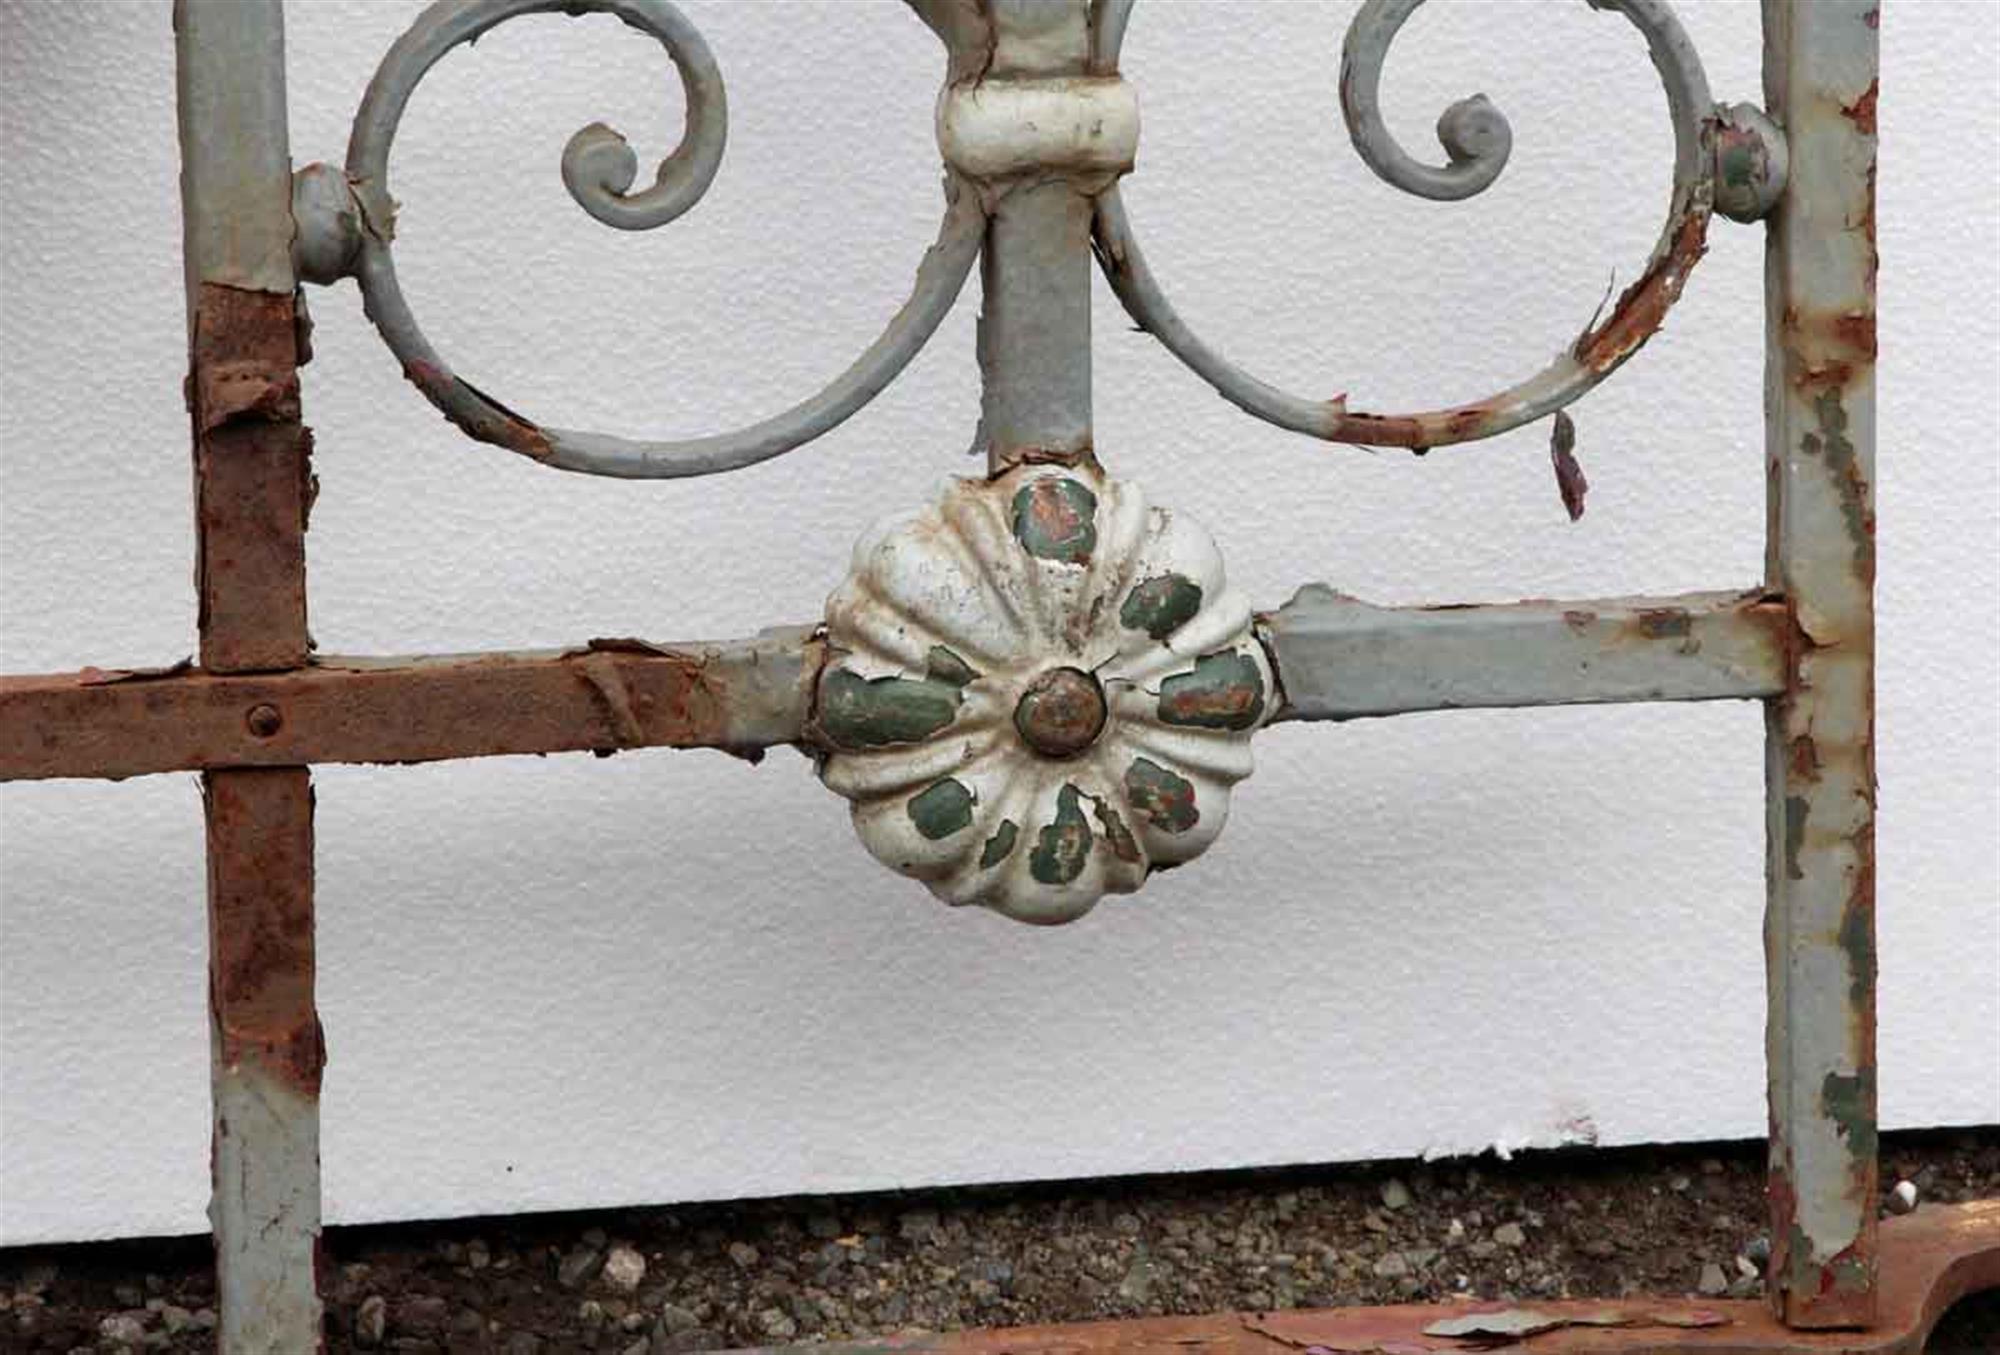 Argentine 1920s Floral Gray and White Wrought Iron Balcony